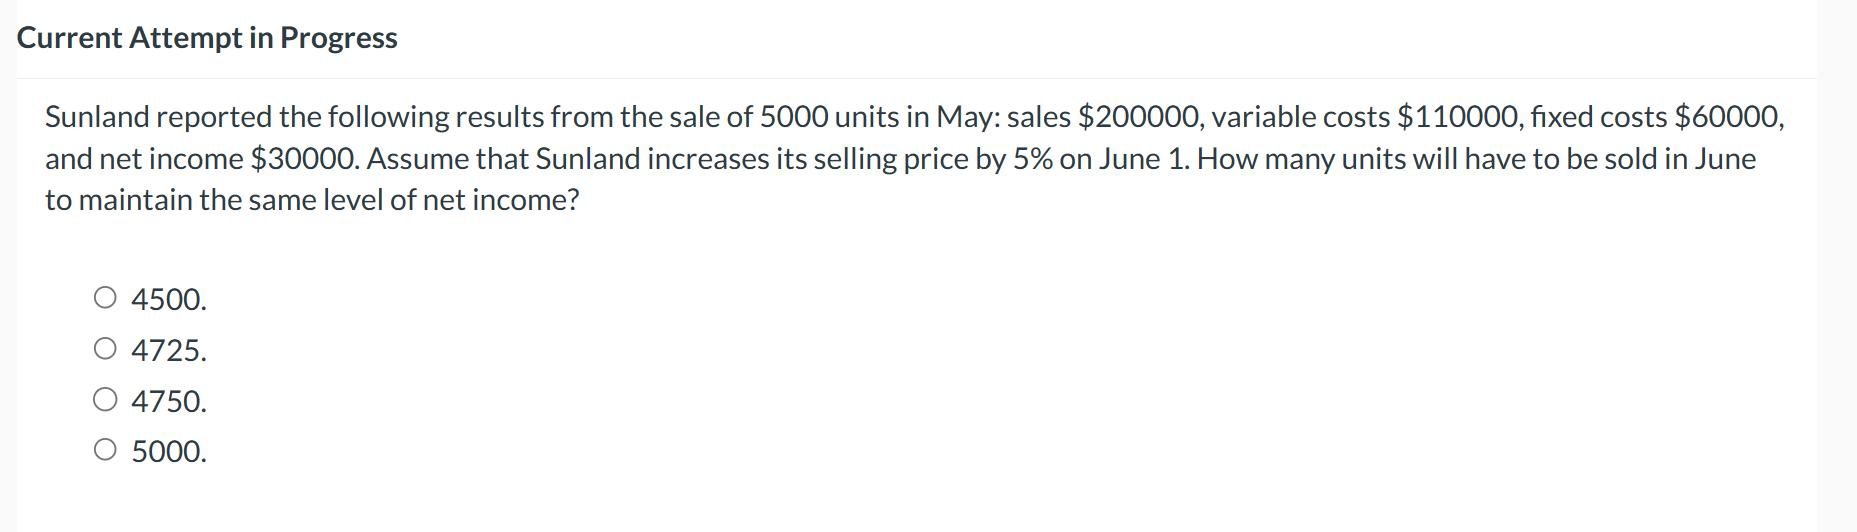 Current Attempt in Progress Sunland reported the following results from the sale of 5000 units in May: sales